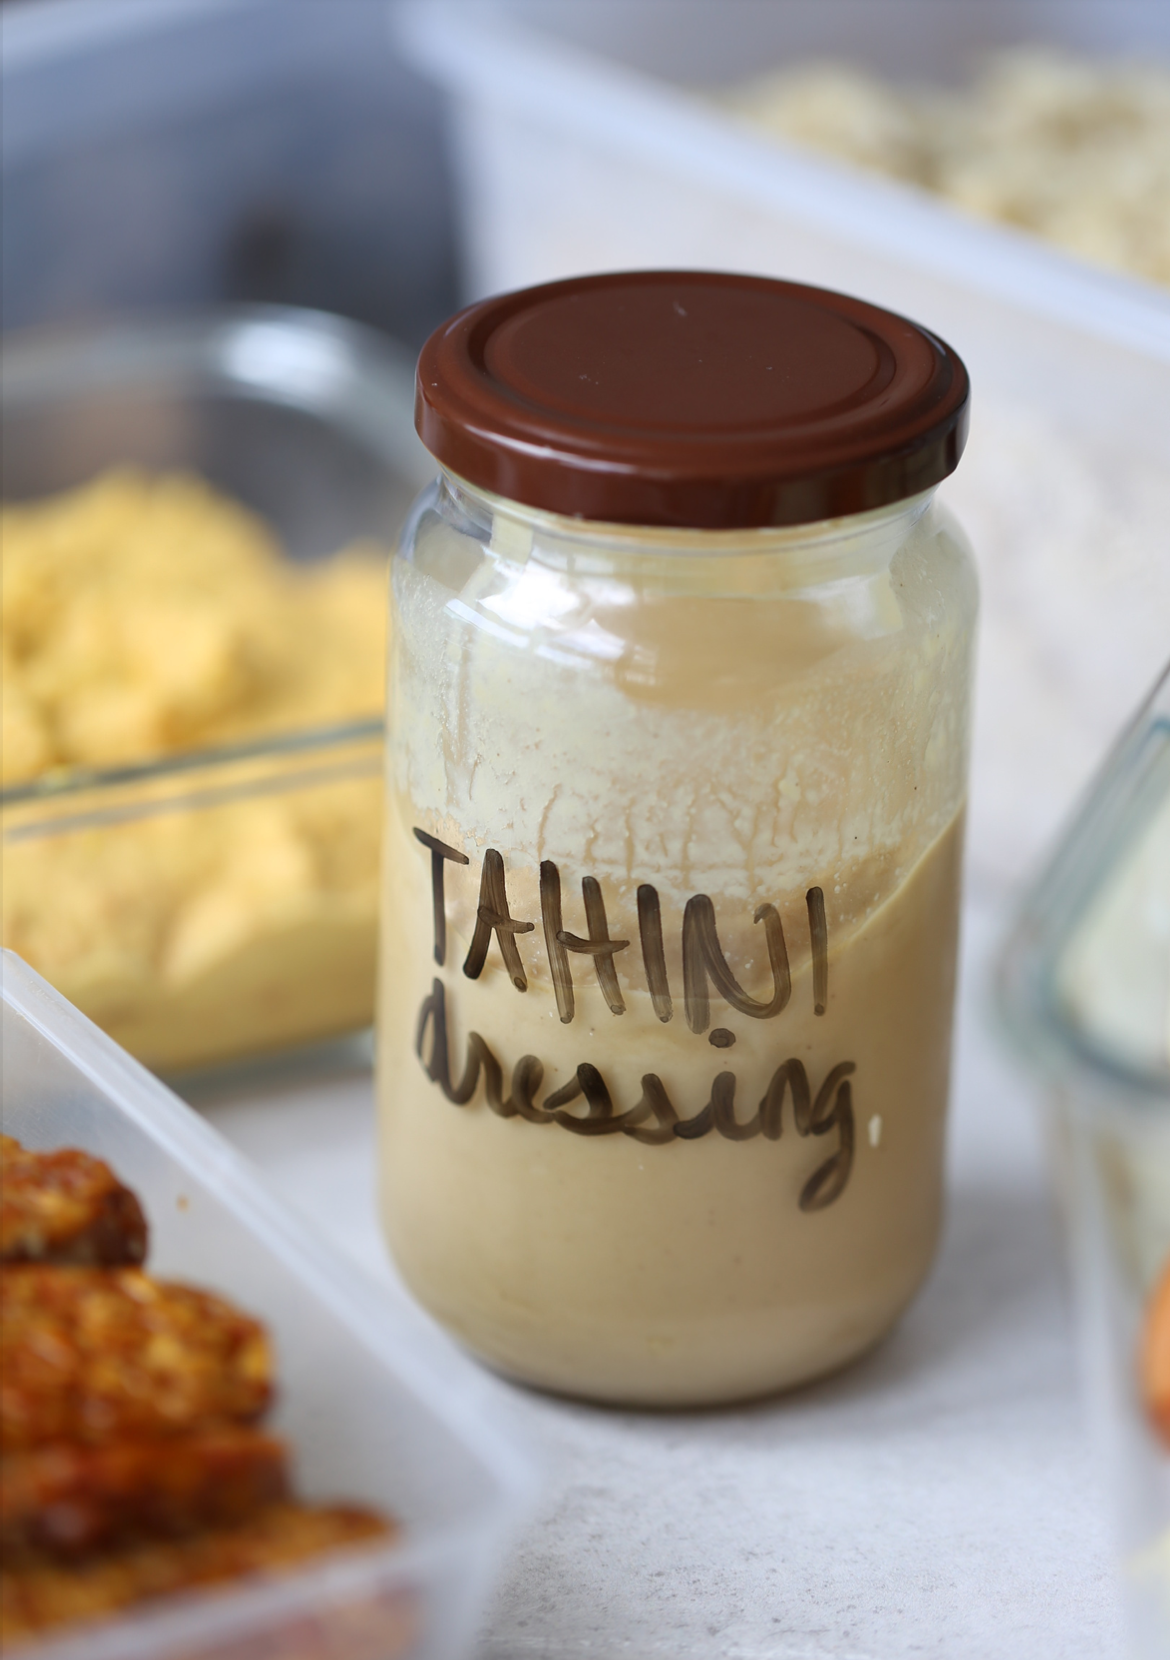 Prepared food with tahini soy dressing or crack sauce, in a glass jar with a brown lid and other dishes in the background. 